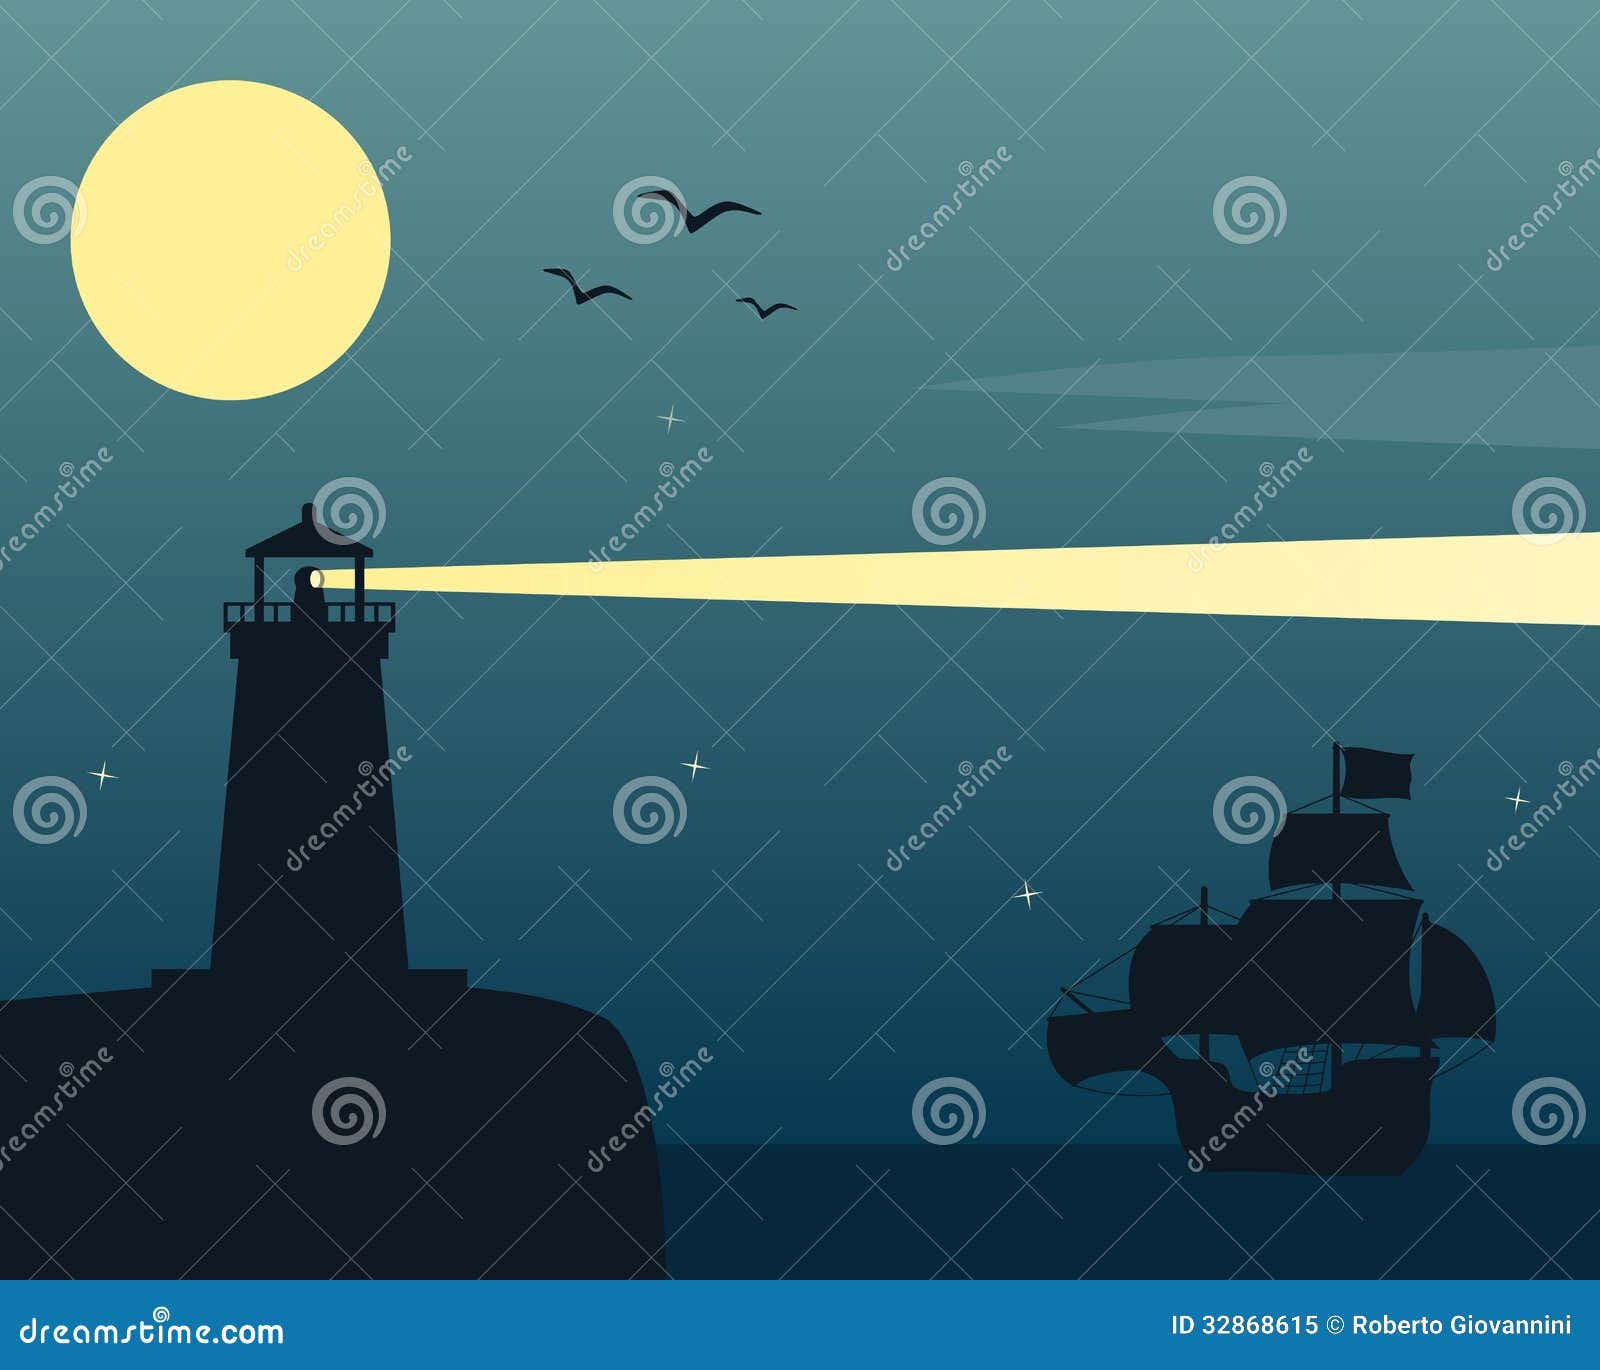 lighthouse and ship in the moonlight stock vector